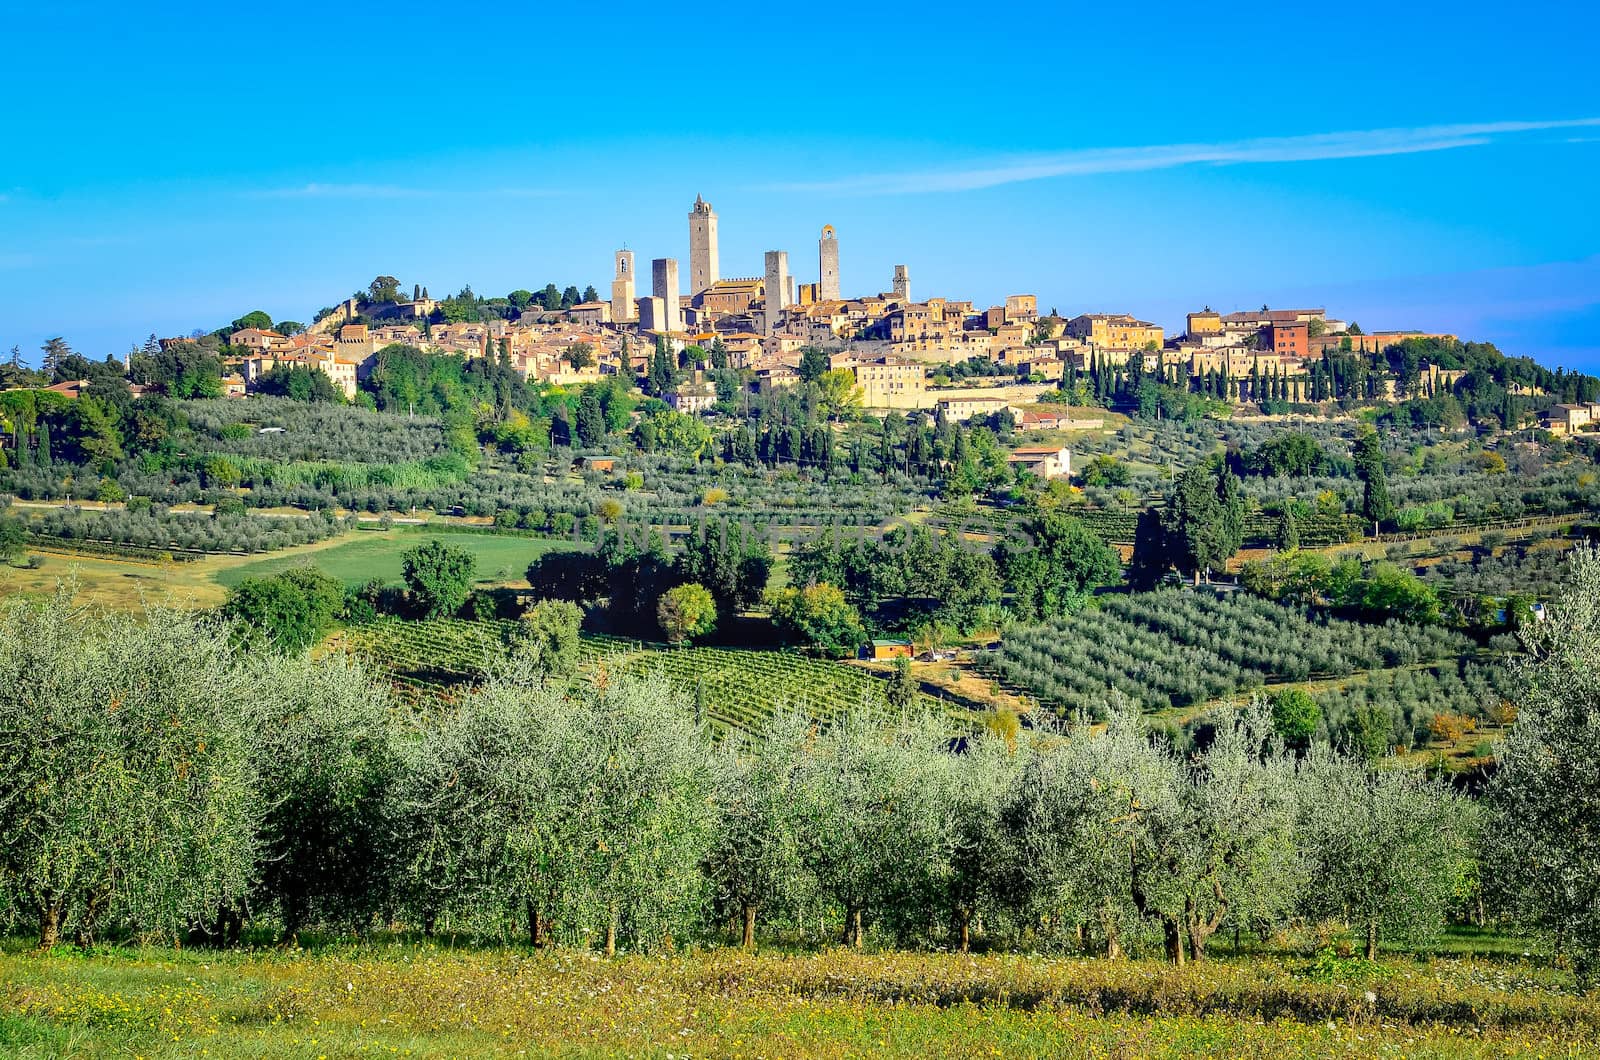 Scenic landscape view of San Gimignano town in Tuscany, Italy